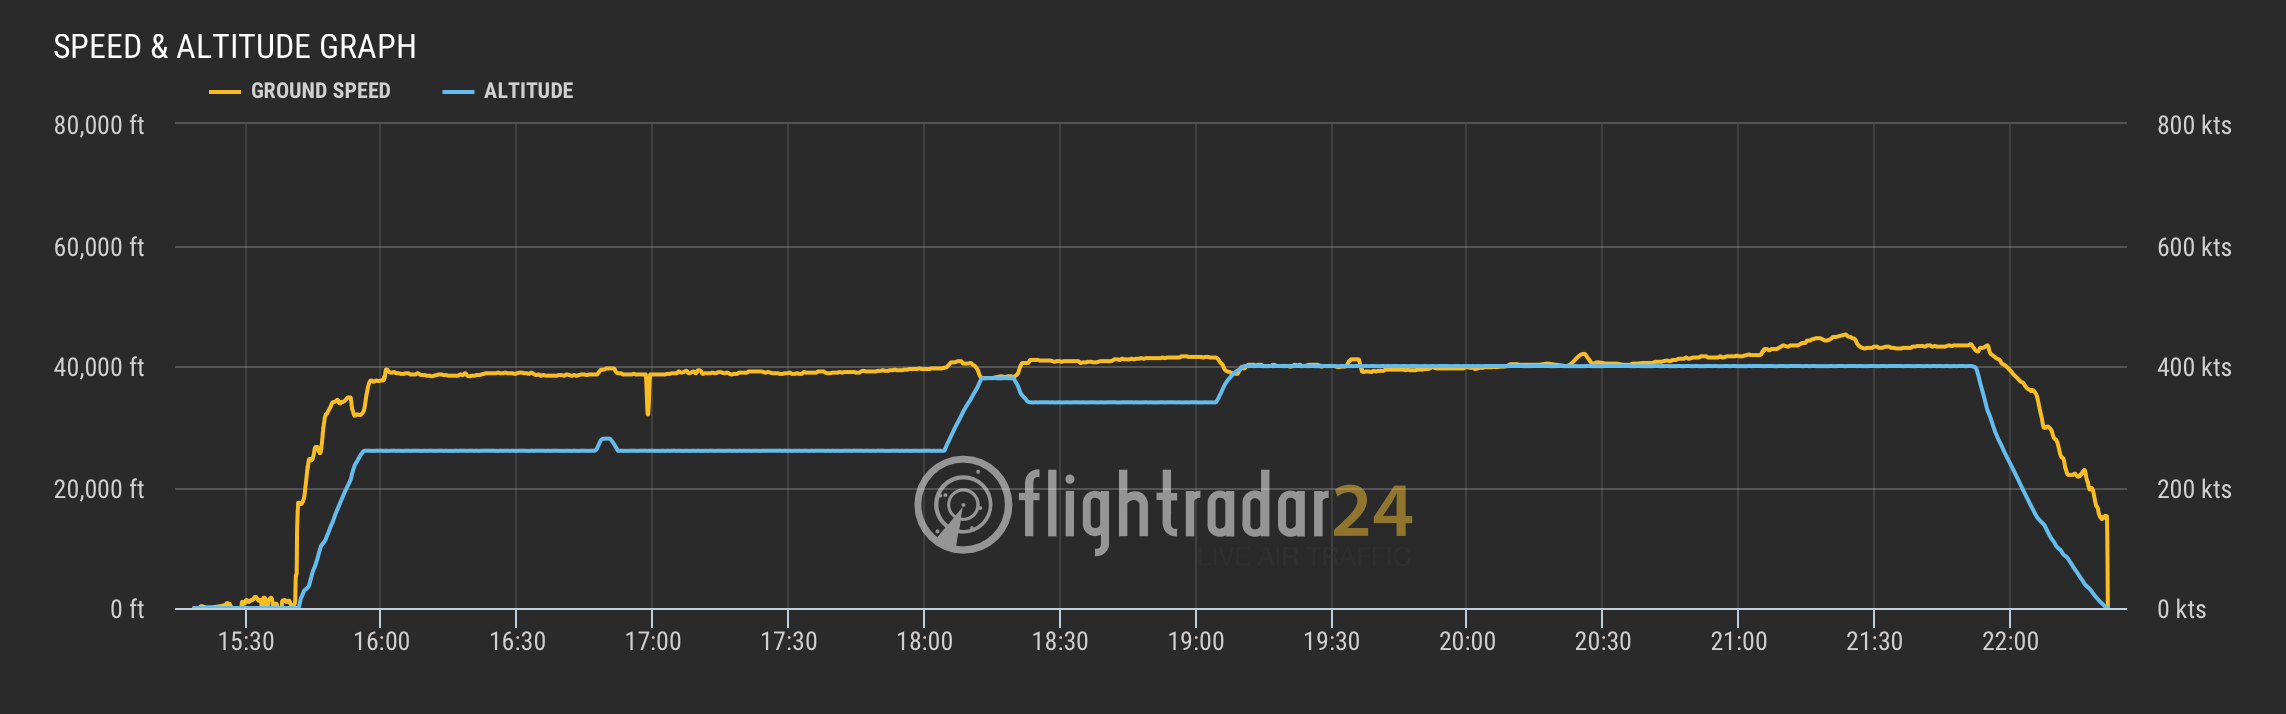 speed and altitude graph